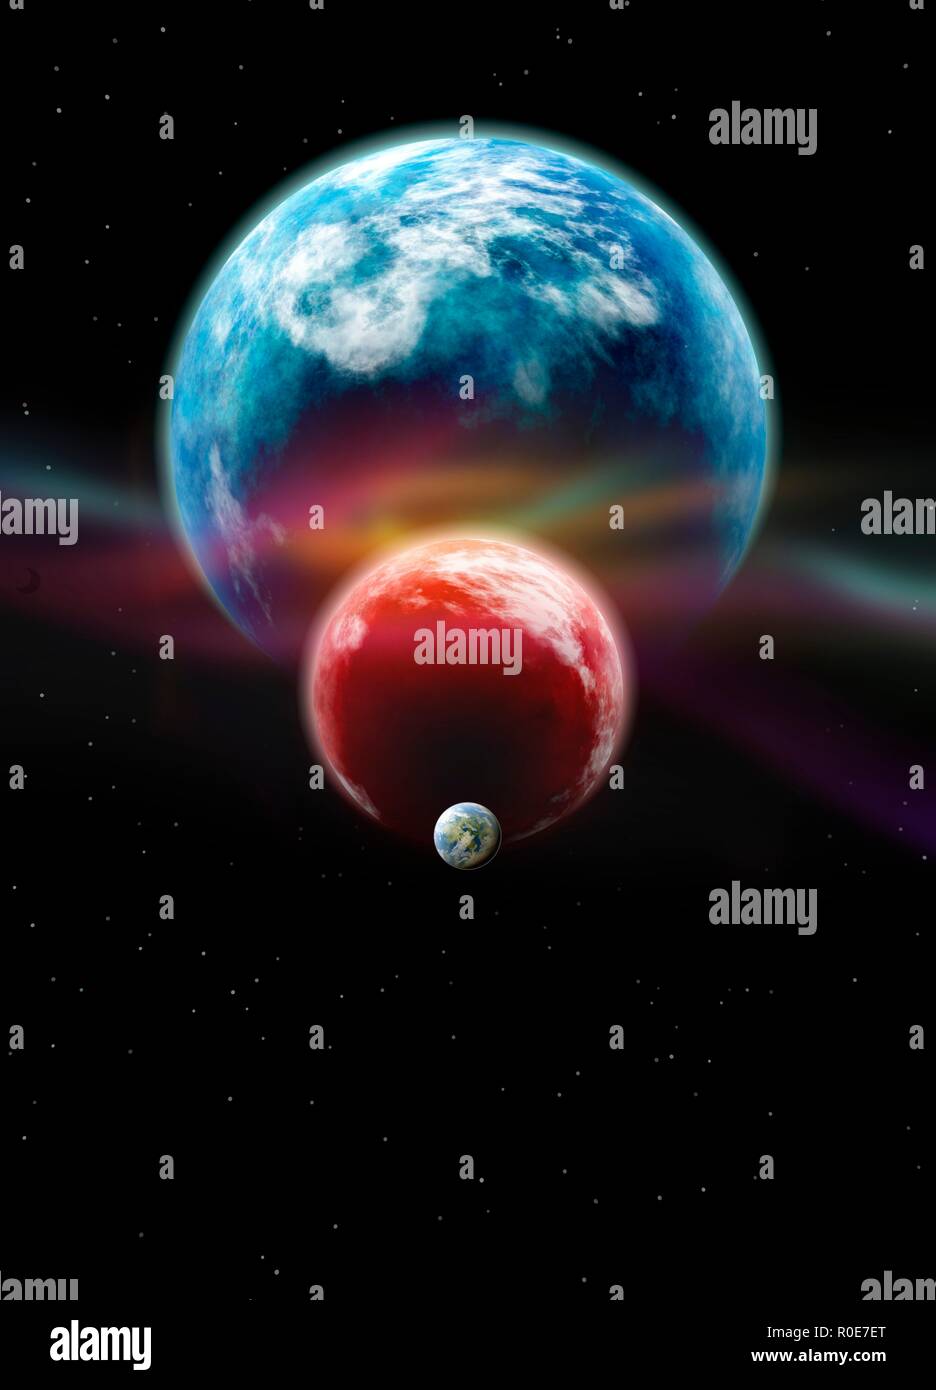 Planets in space, illustration. Stock Photo